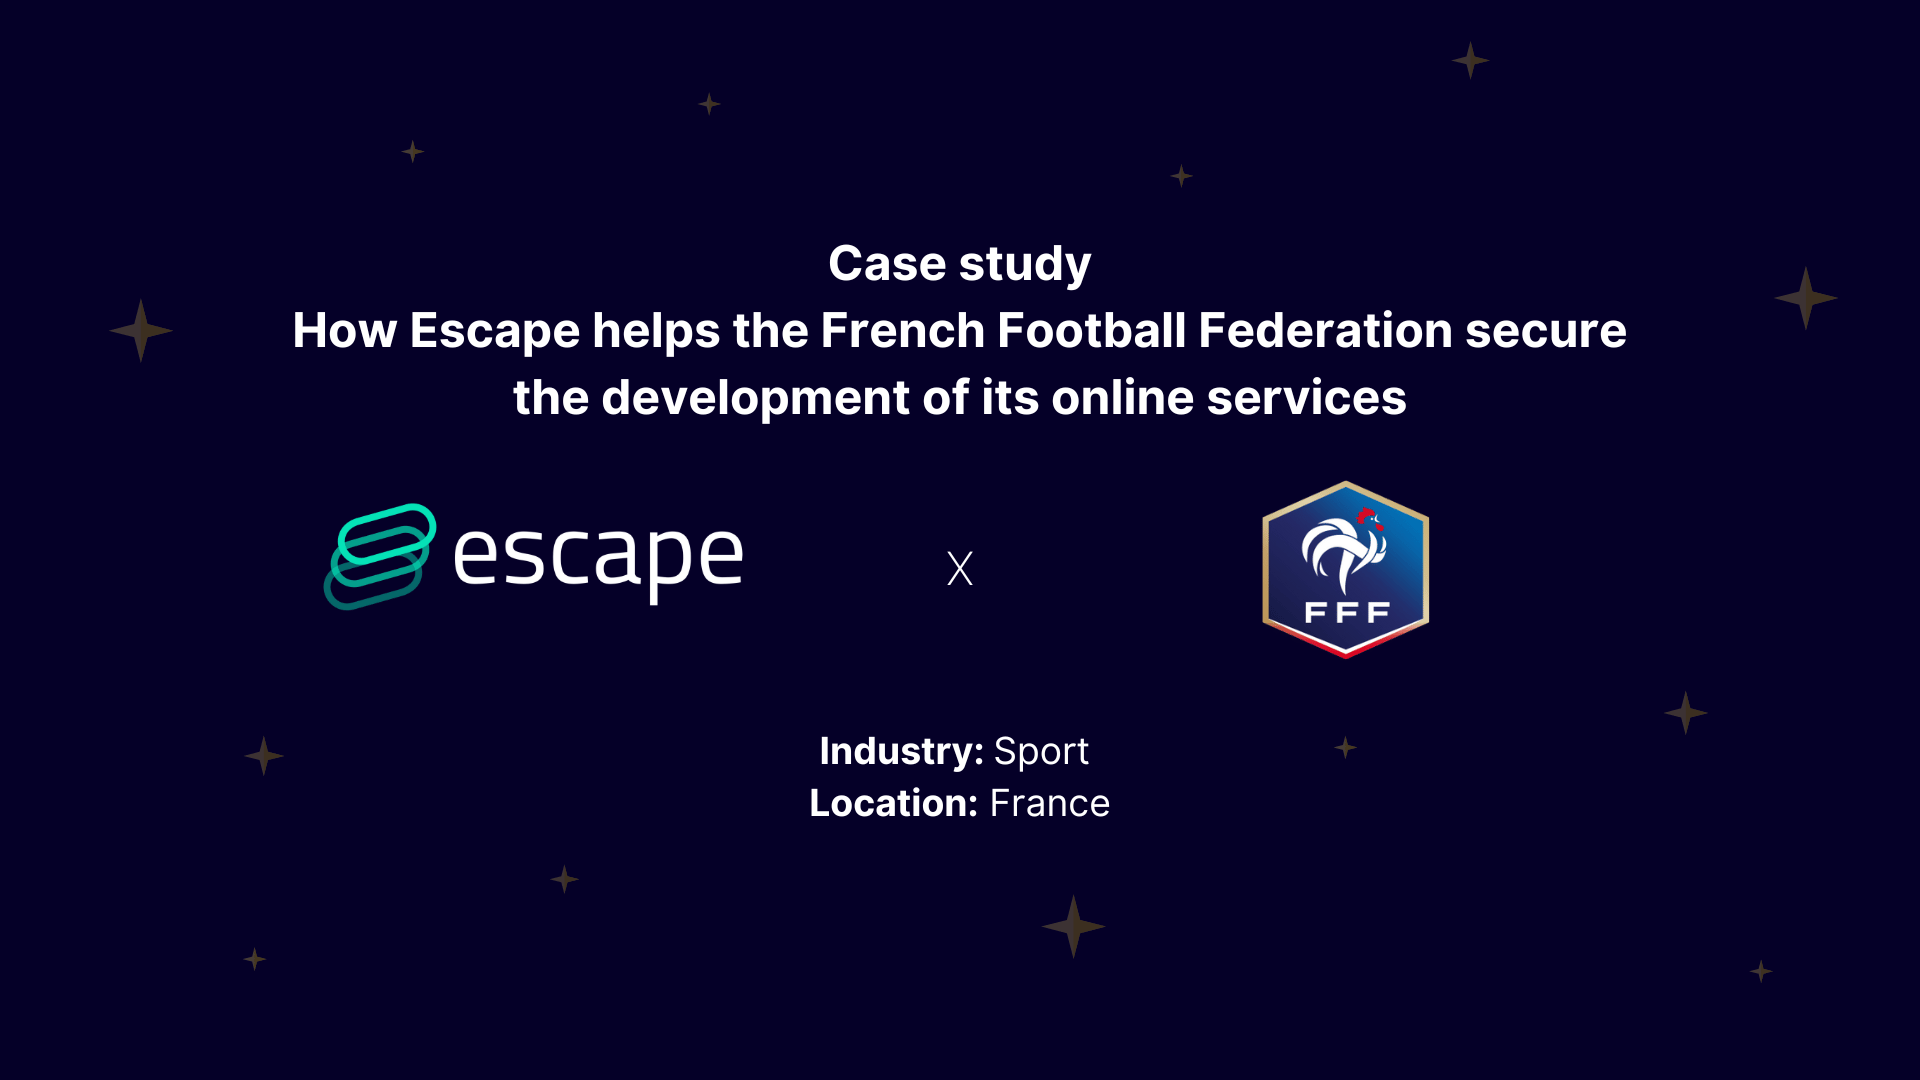 Case Study: How Escape helps the French Football Federation secure the development of its online services